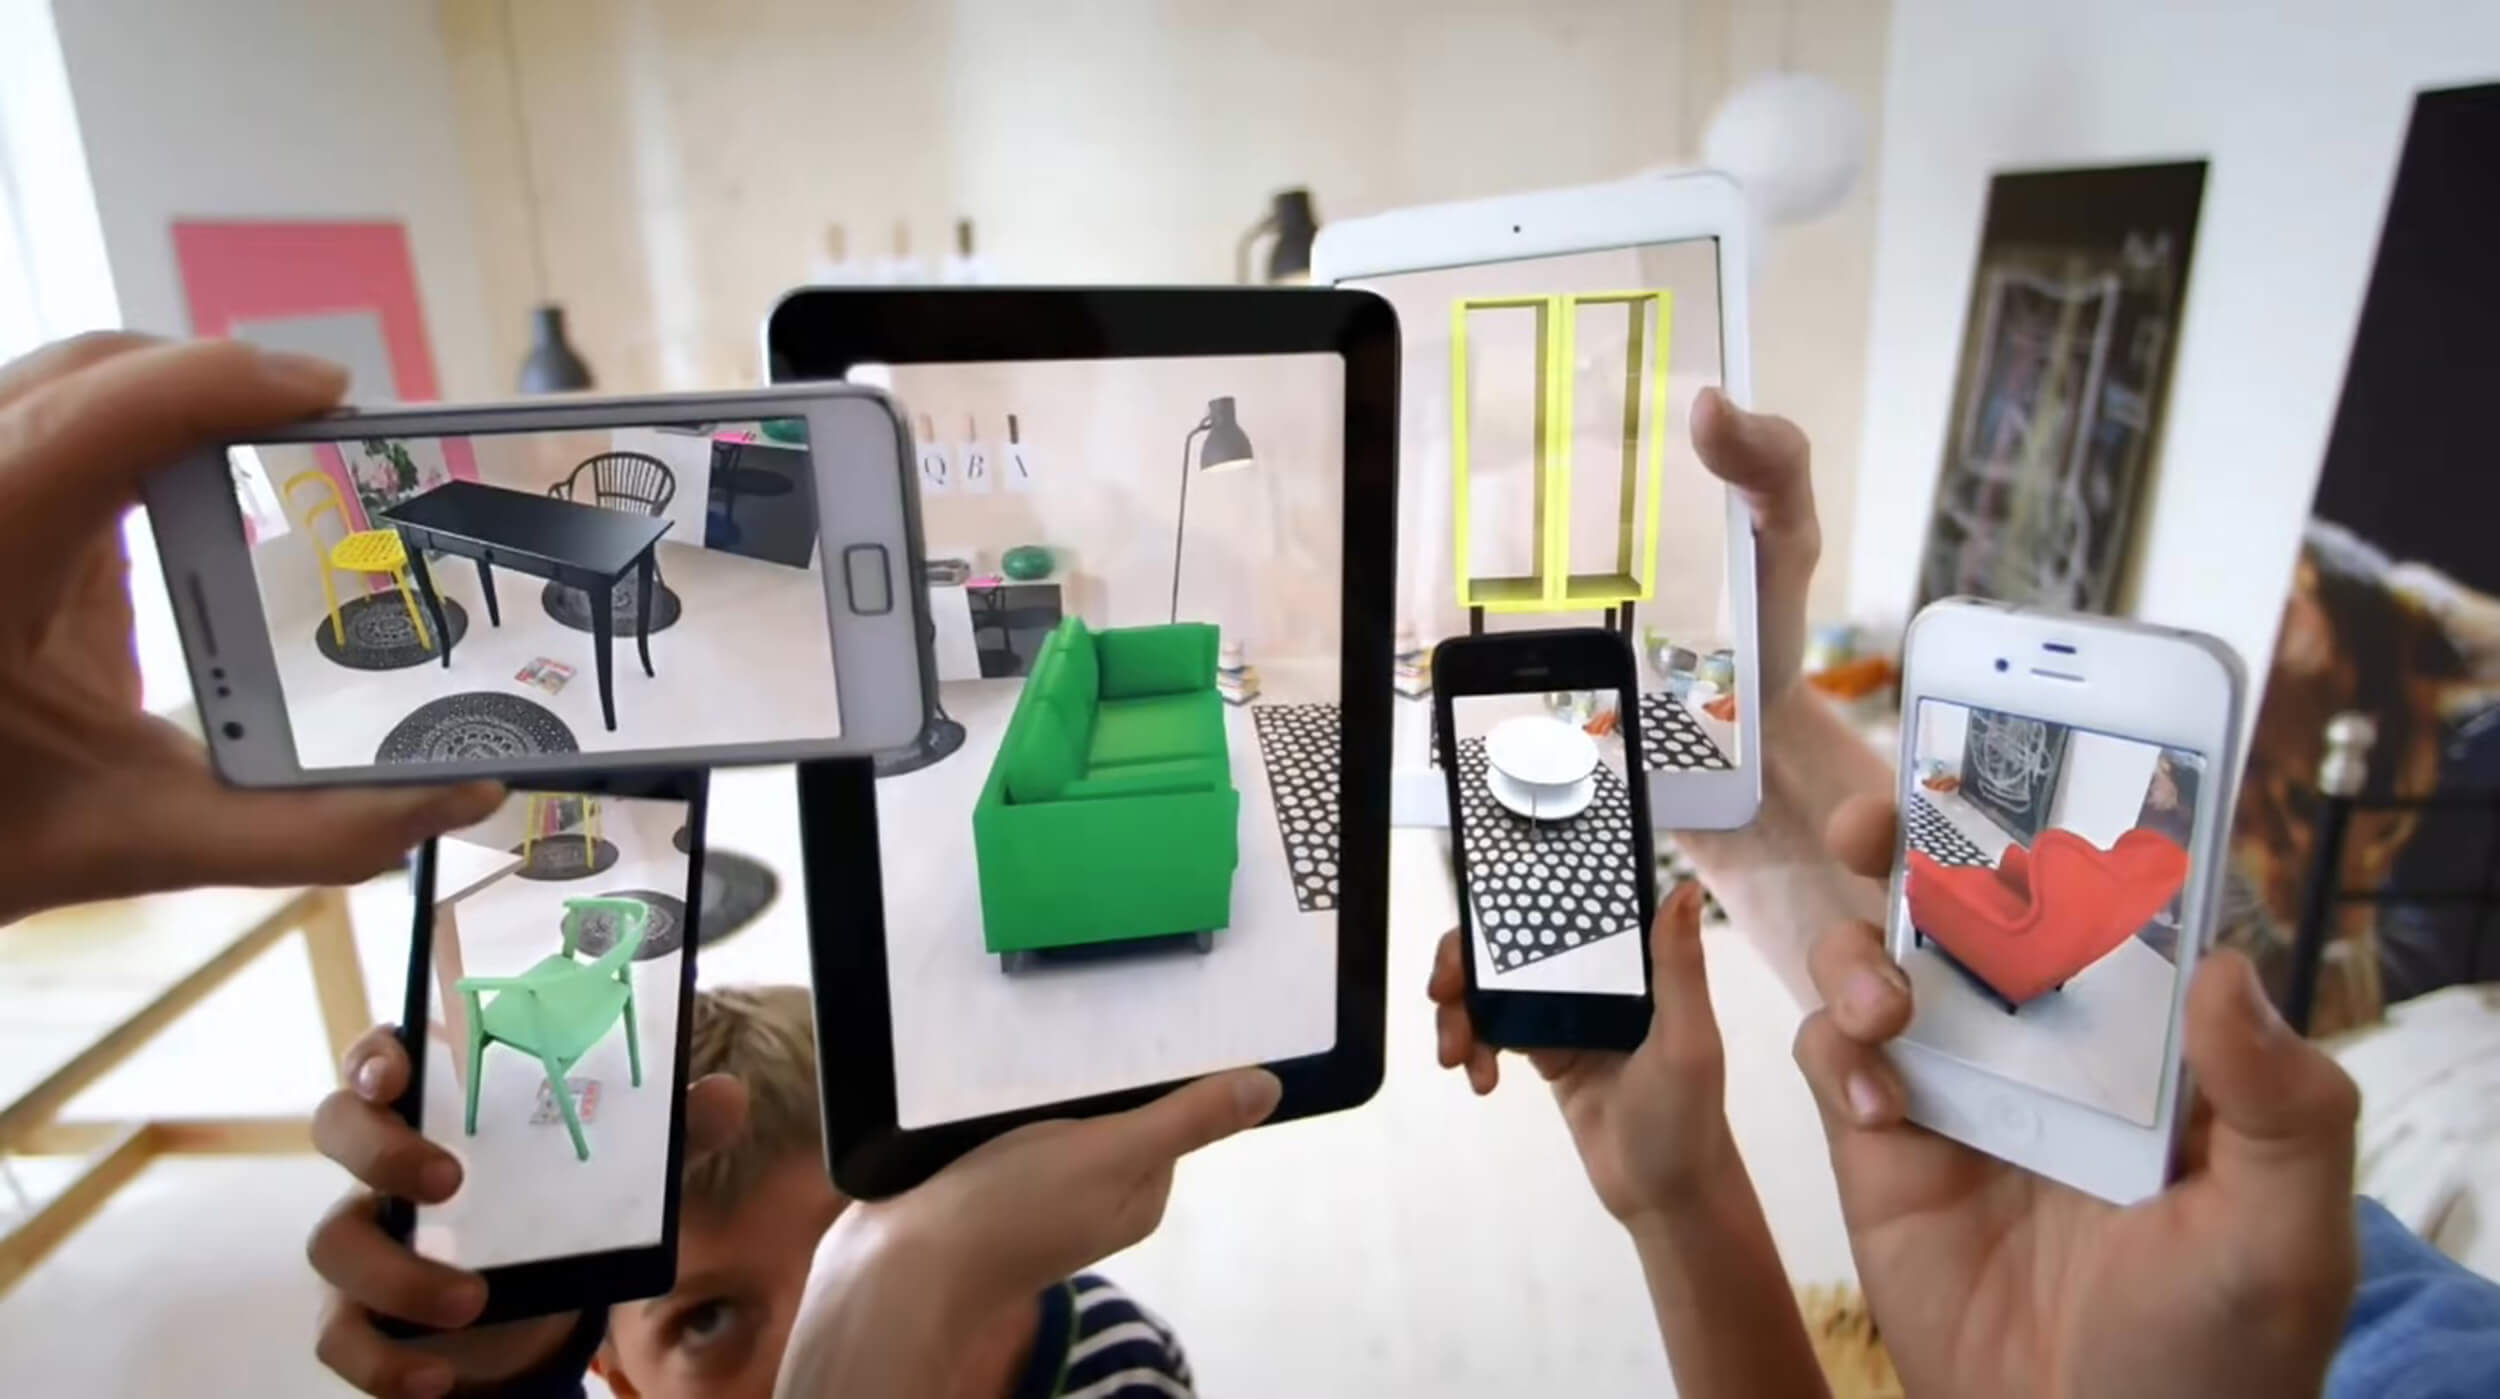 IKEA makes virtual room design easier with augmented reality